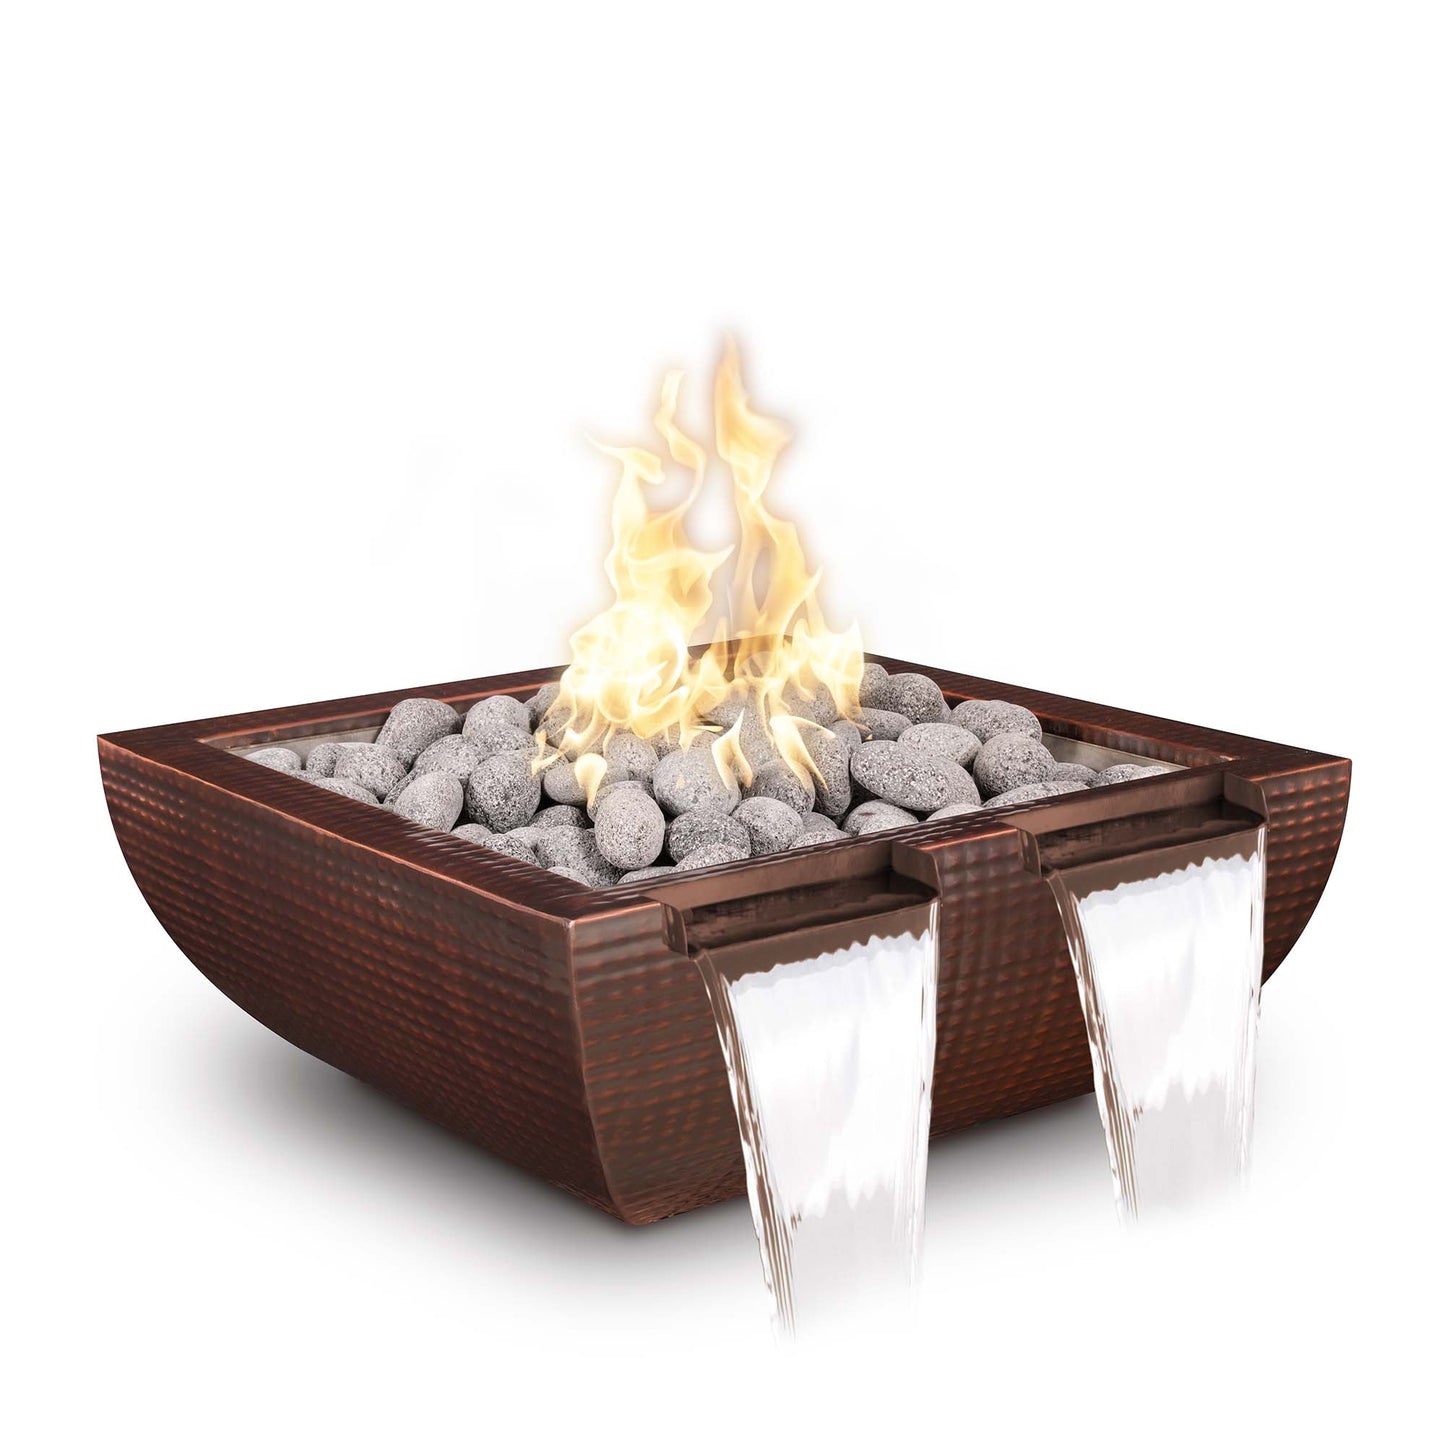 The Outdoor Plus Avalon Twin Spill 36" Black Powder Coated Metal Liquid Propane Fire & Water Bowl with 12V Electronic Ignition